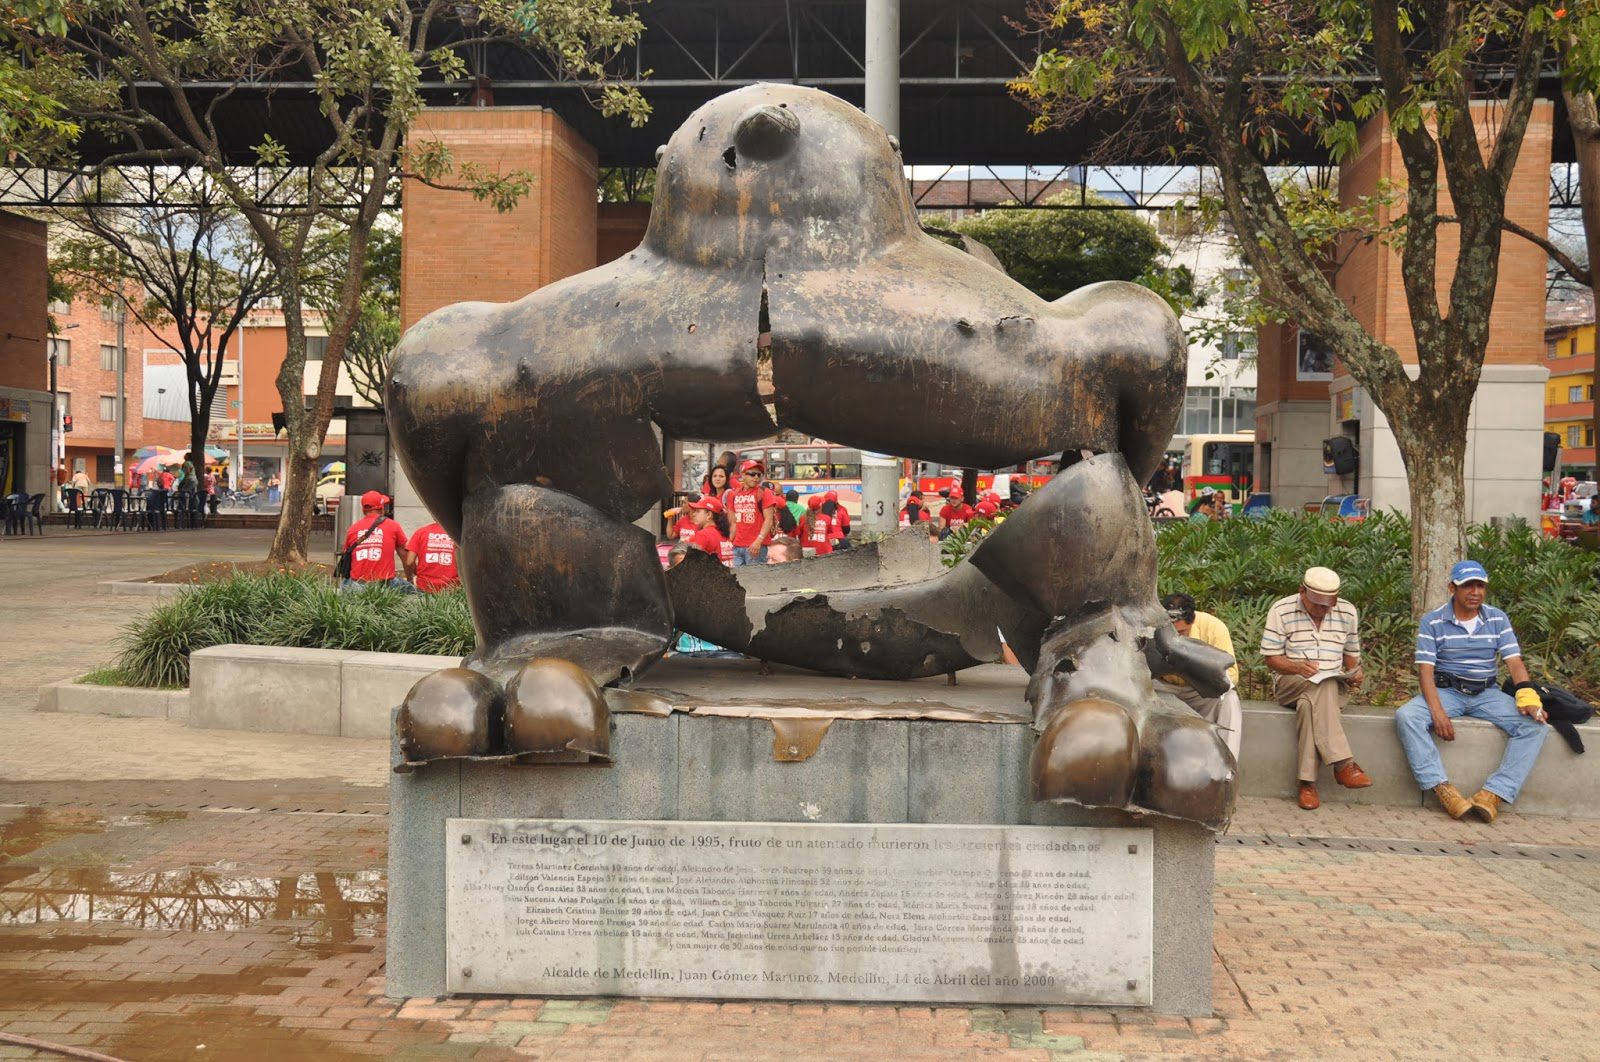 This Botera statue was bombed during a festival, wounding more than 200 people and killing 17, including a 7 year old girl. It is left standing to remind people of what Medellin used to be. Next to it stands a new replica of the statue, representing what Medellin is today.